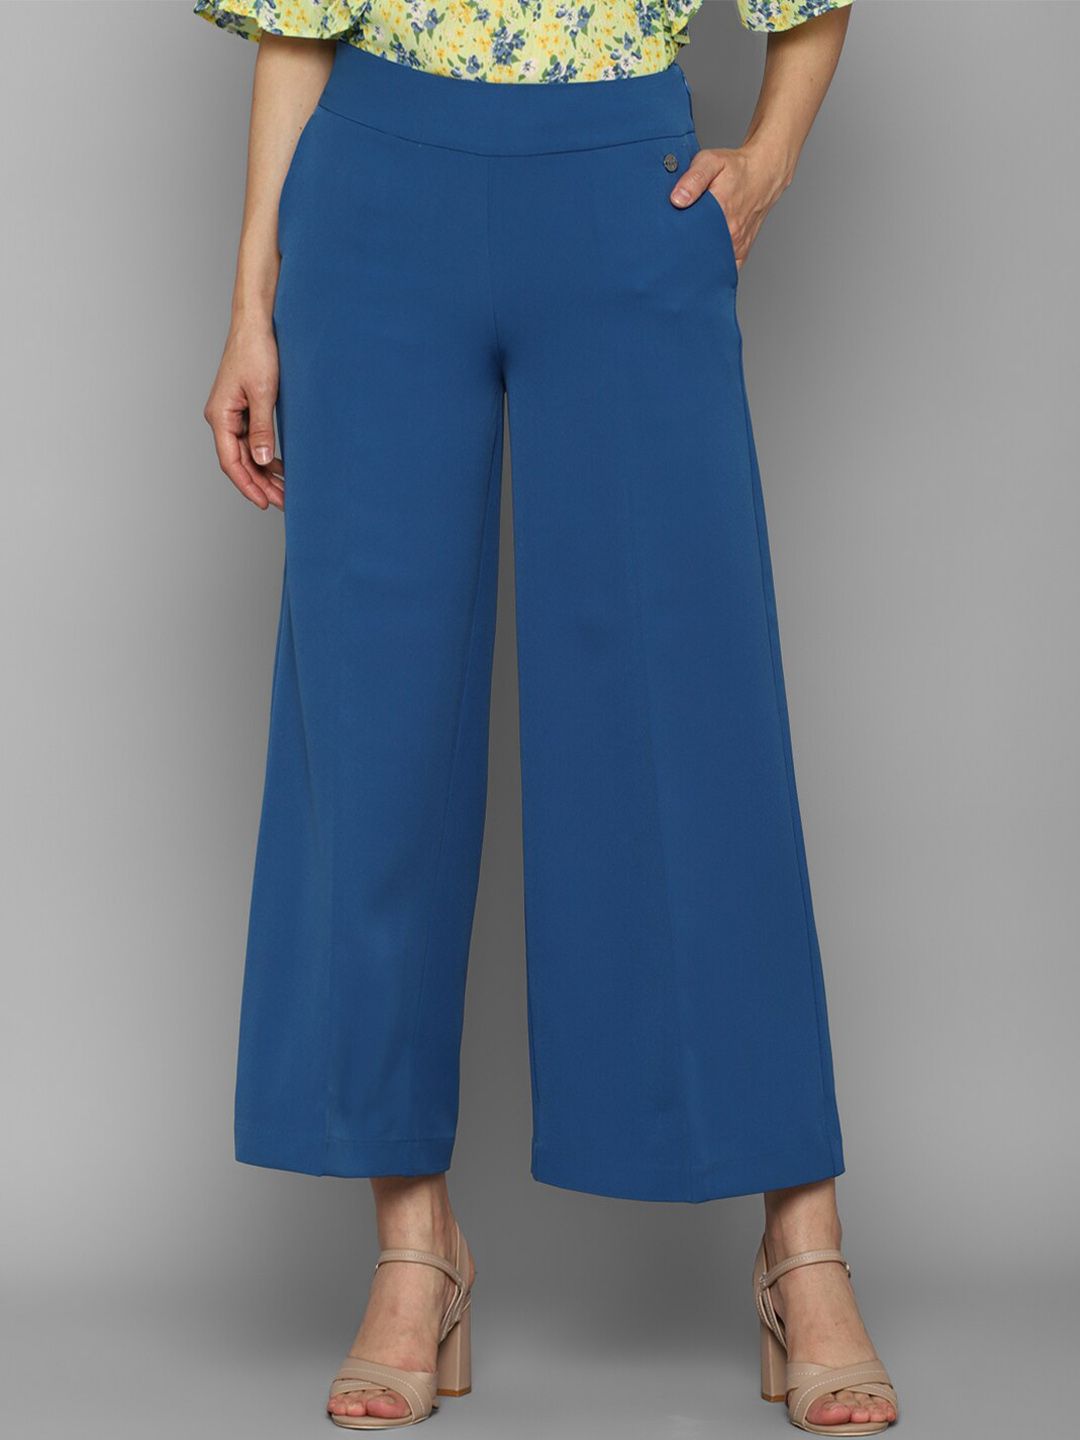 Allen Solly Woman Women Blue Trousers Price in India